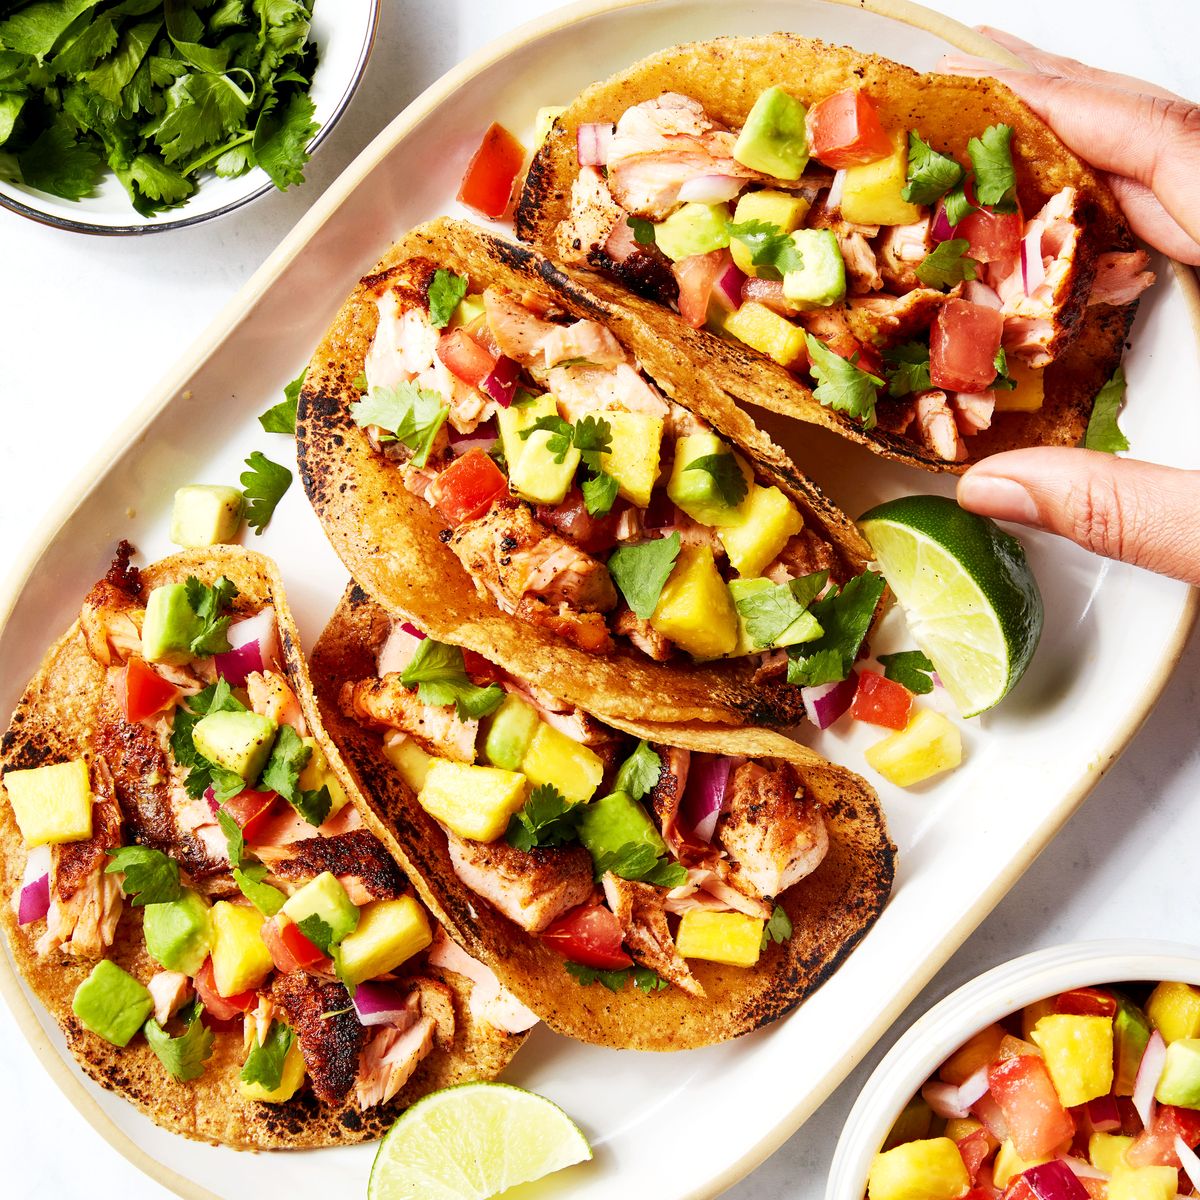 These Salmon Tacos With Avocado Salsa Will Make You Wish Taco Tuesday Was Everyday